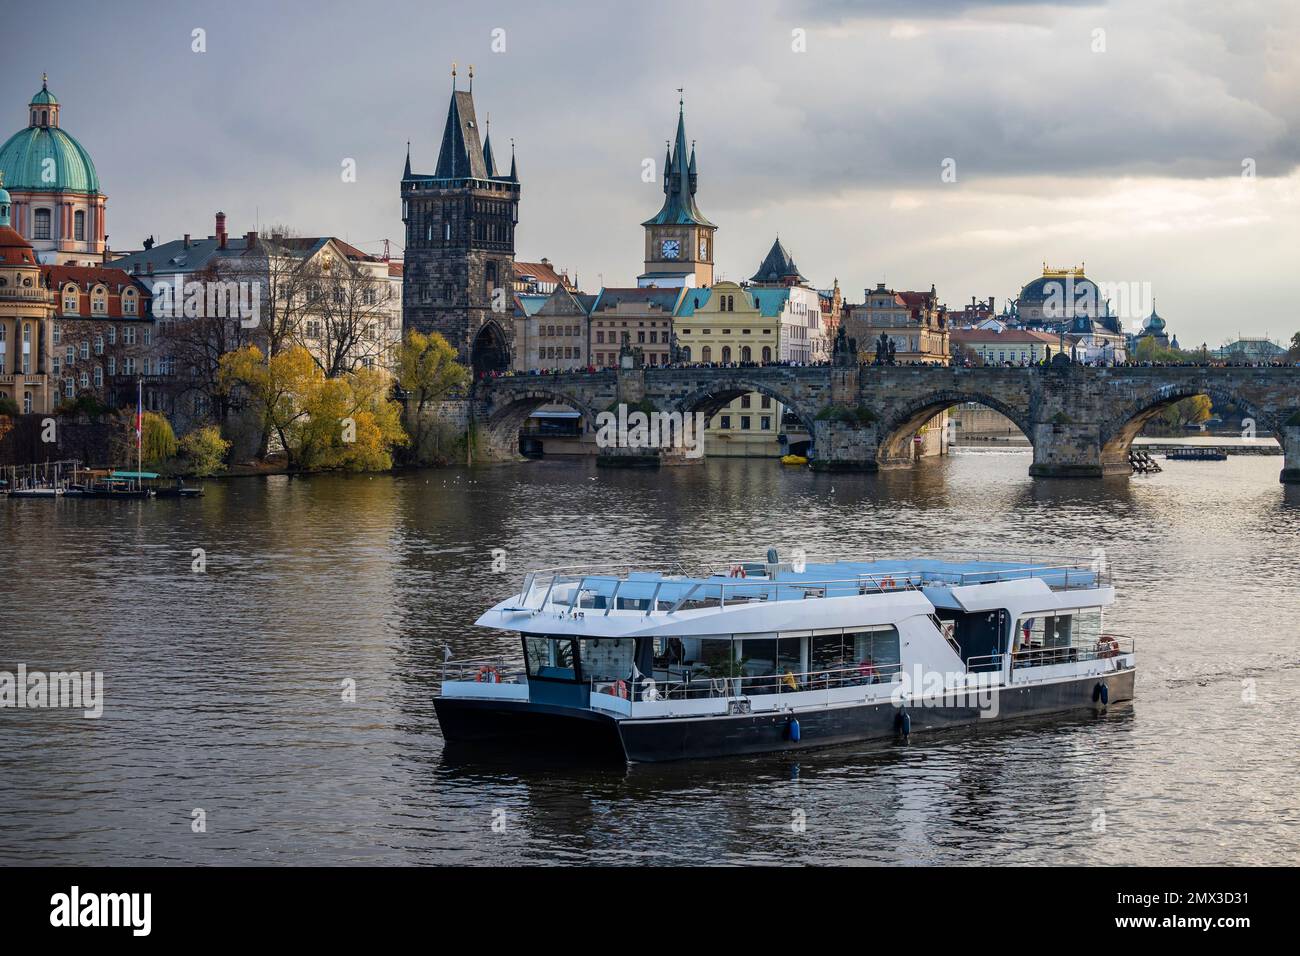 Panorama of beautiful ancient tower, building, church and part of Charles bridge, river Vltava with boat. Czech republic, Prague. Stock Photo